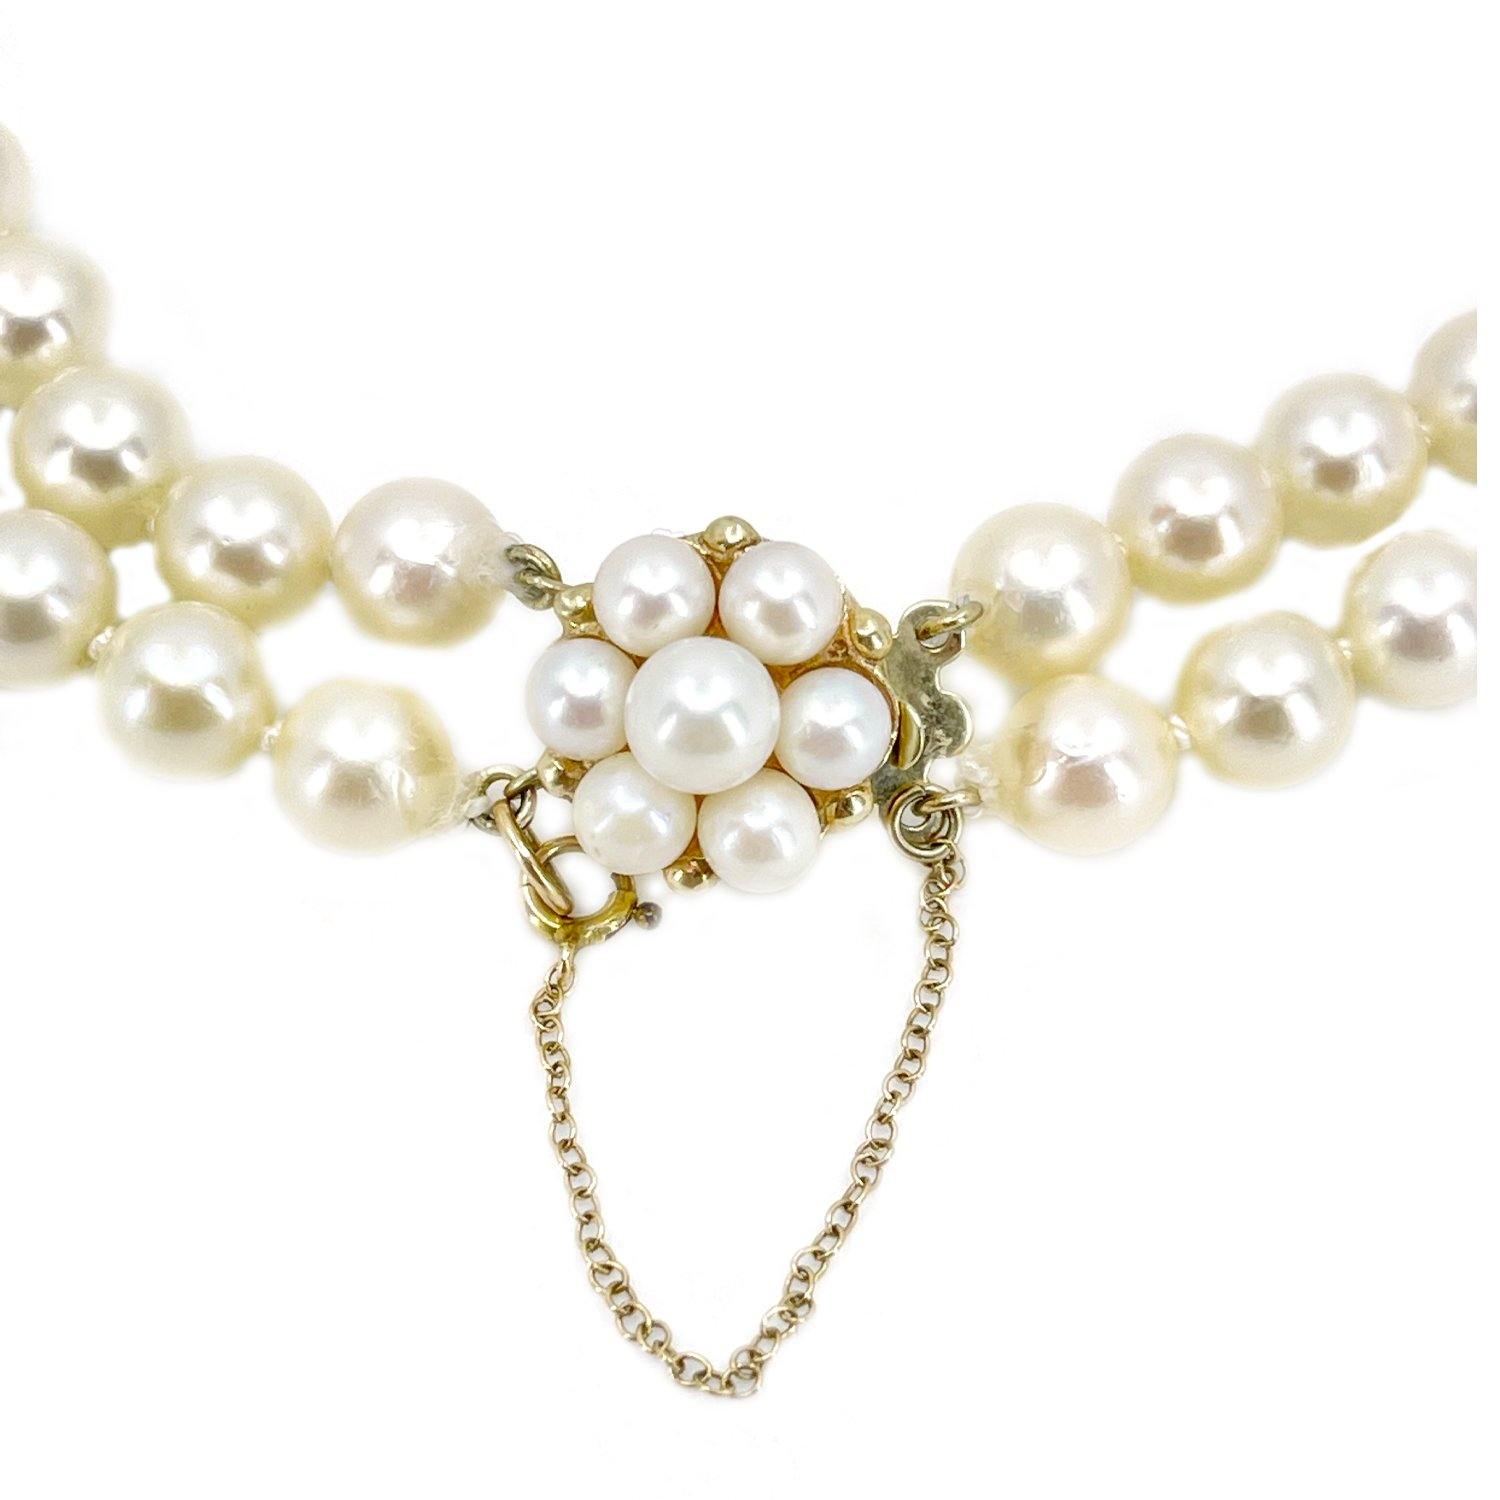 Double Strand Choker Halo Japanese Saltwater Cultured Akoya Pearl Necklace - 14K Yellow Gold 13.50 & 14.50 Inch